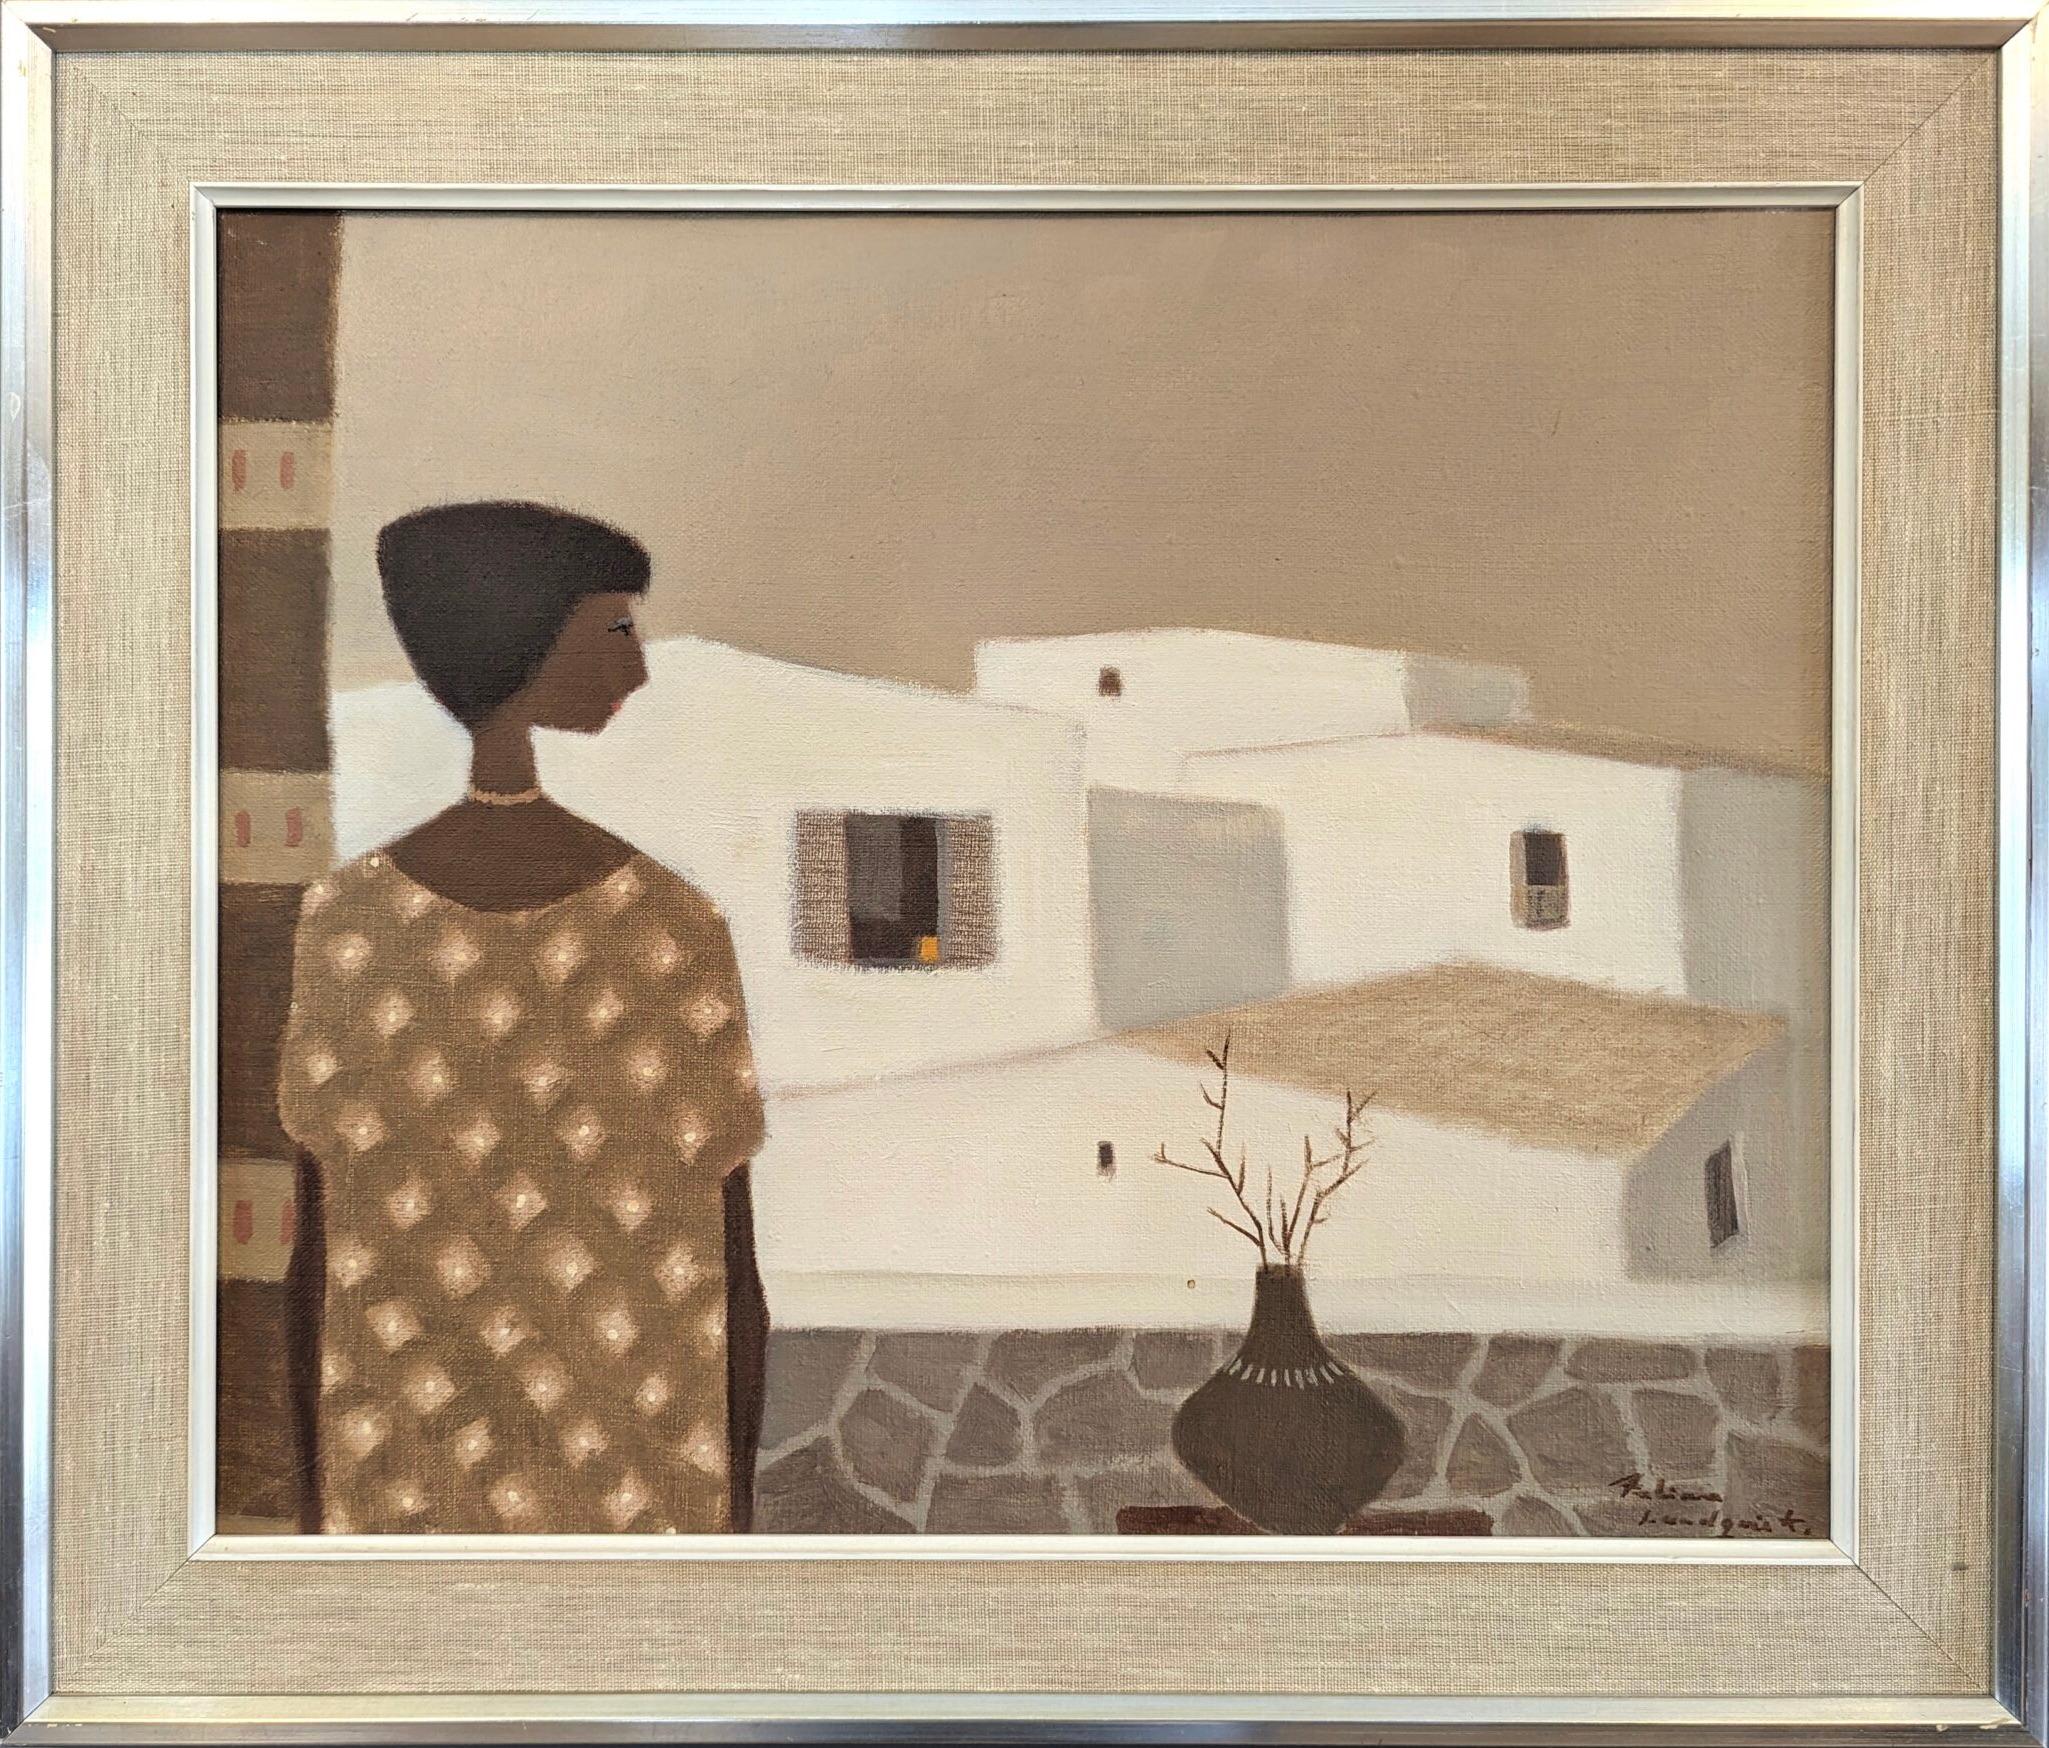 TERRACE SIGHTINGS 
Oil on Canvas
Size: 49 x 56.5 cm (including frame)

A soothing and restful mid-century modern painting, executed in oil onto canvas by the established Swedish artist Fabian Lundqvist (1913-1989), whose works have been represented